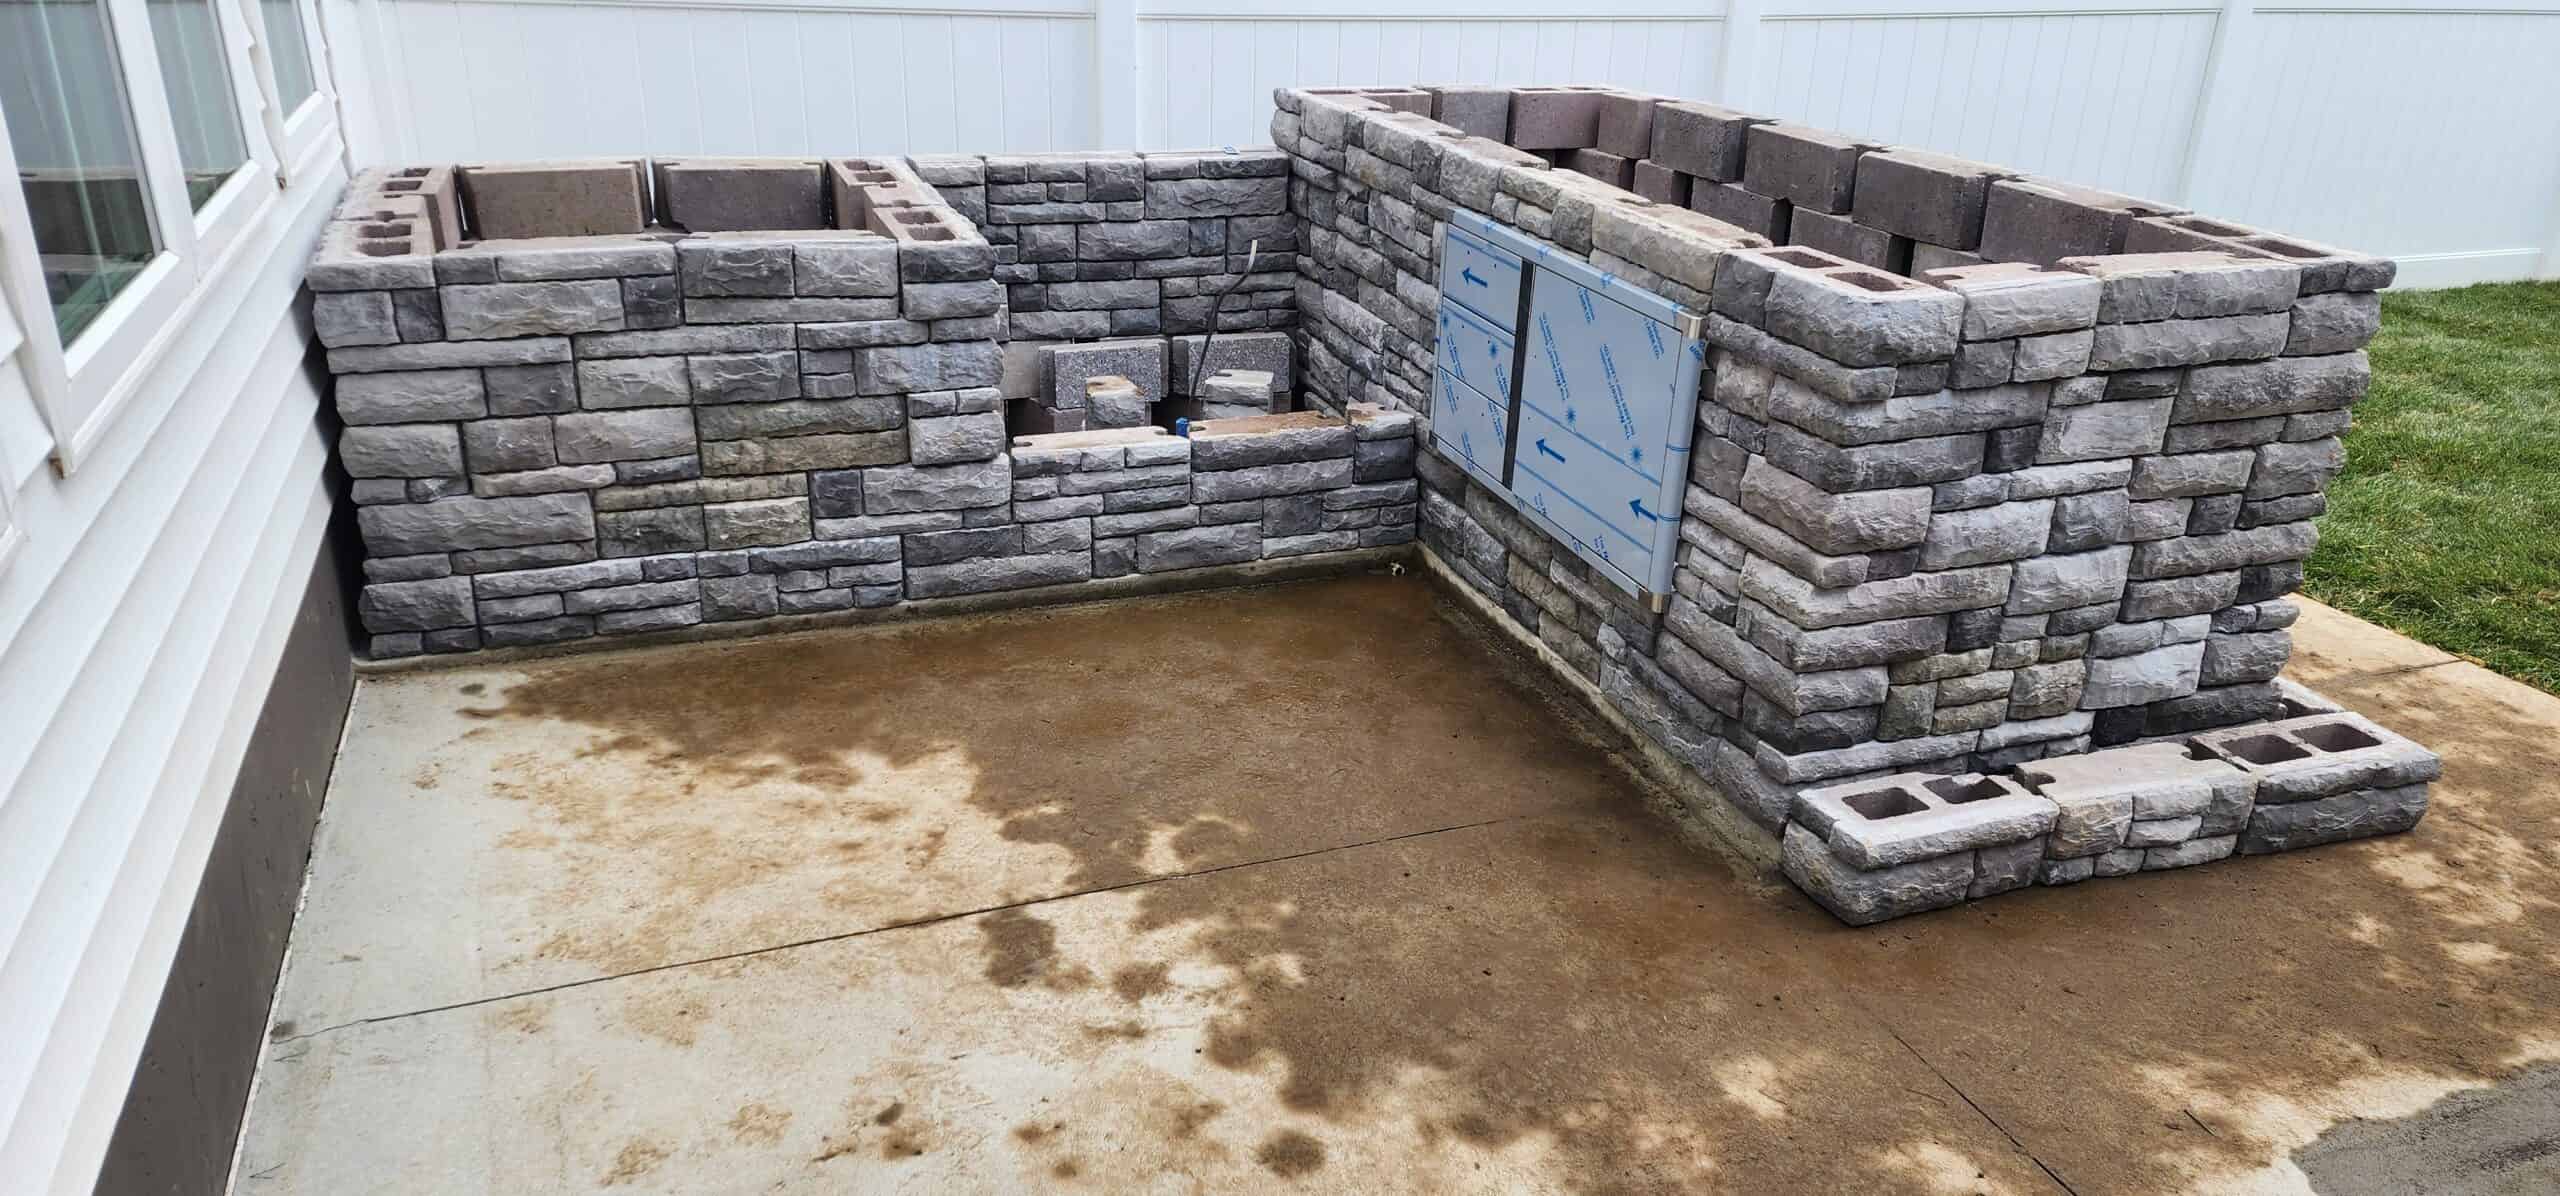 a stone outdoor kitchen and firepit under construction on a large backyard patio